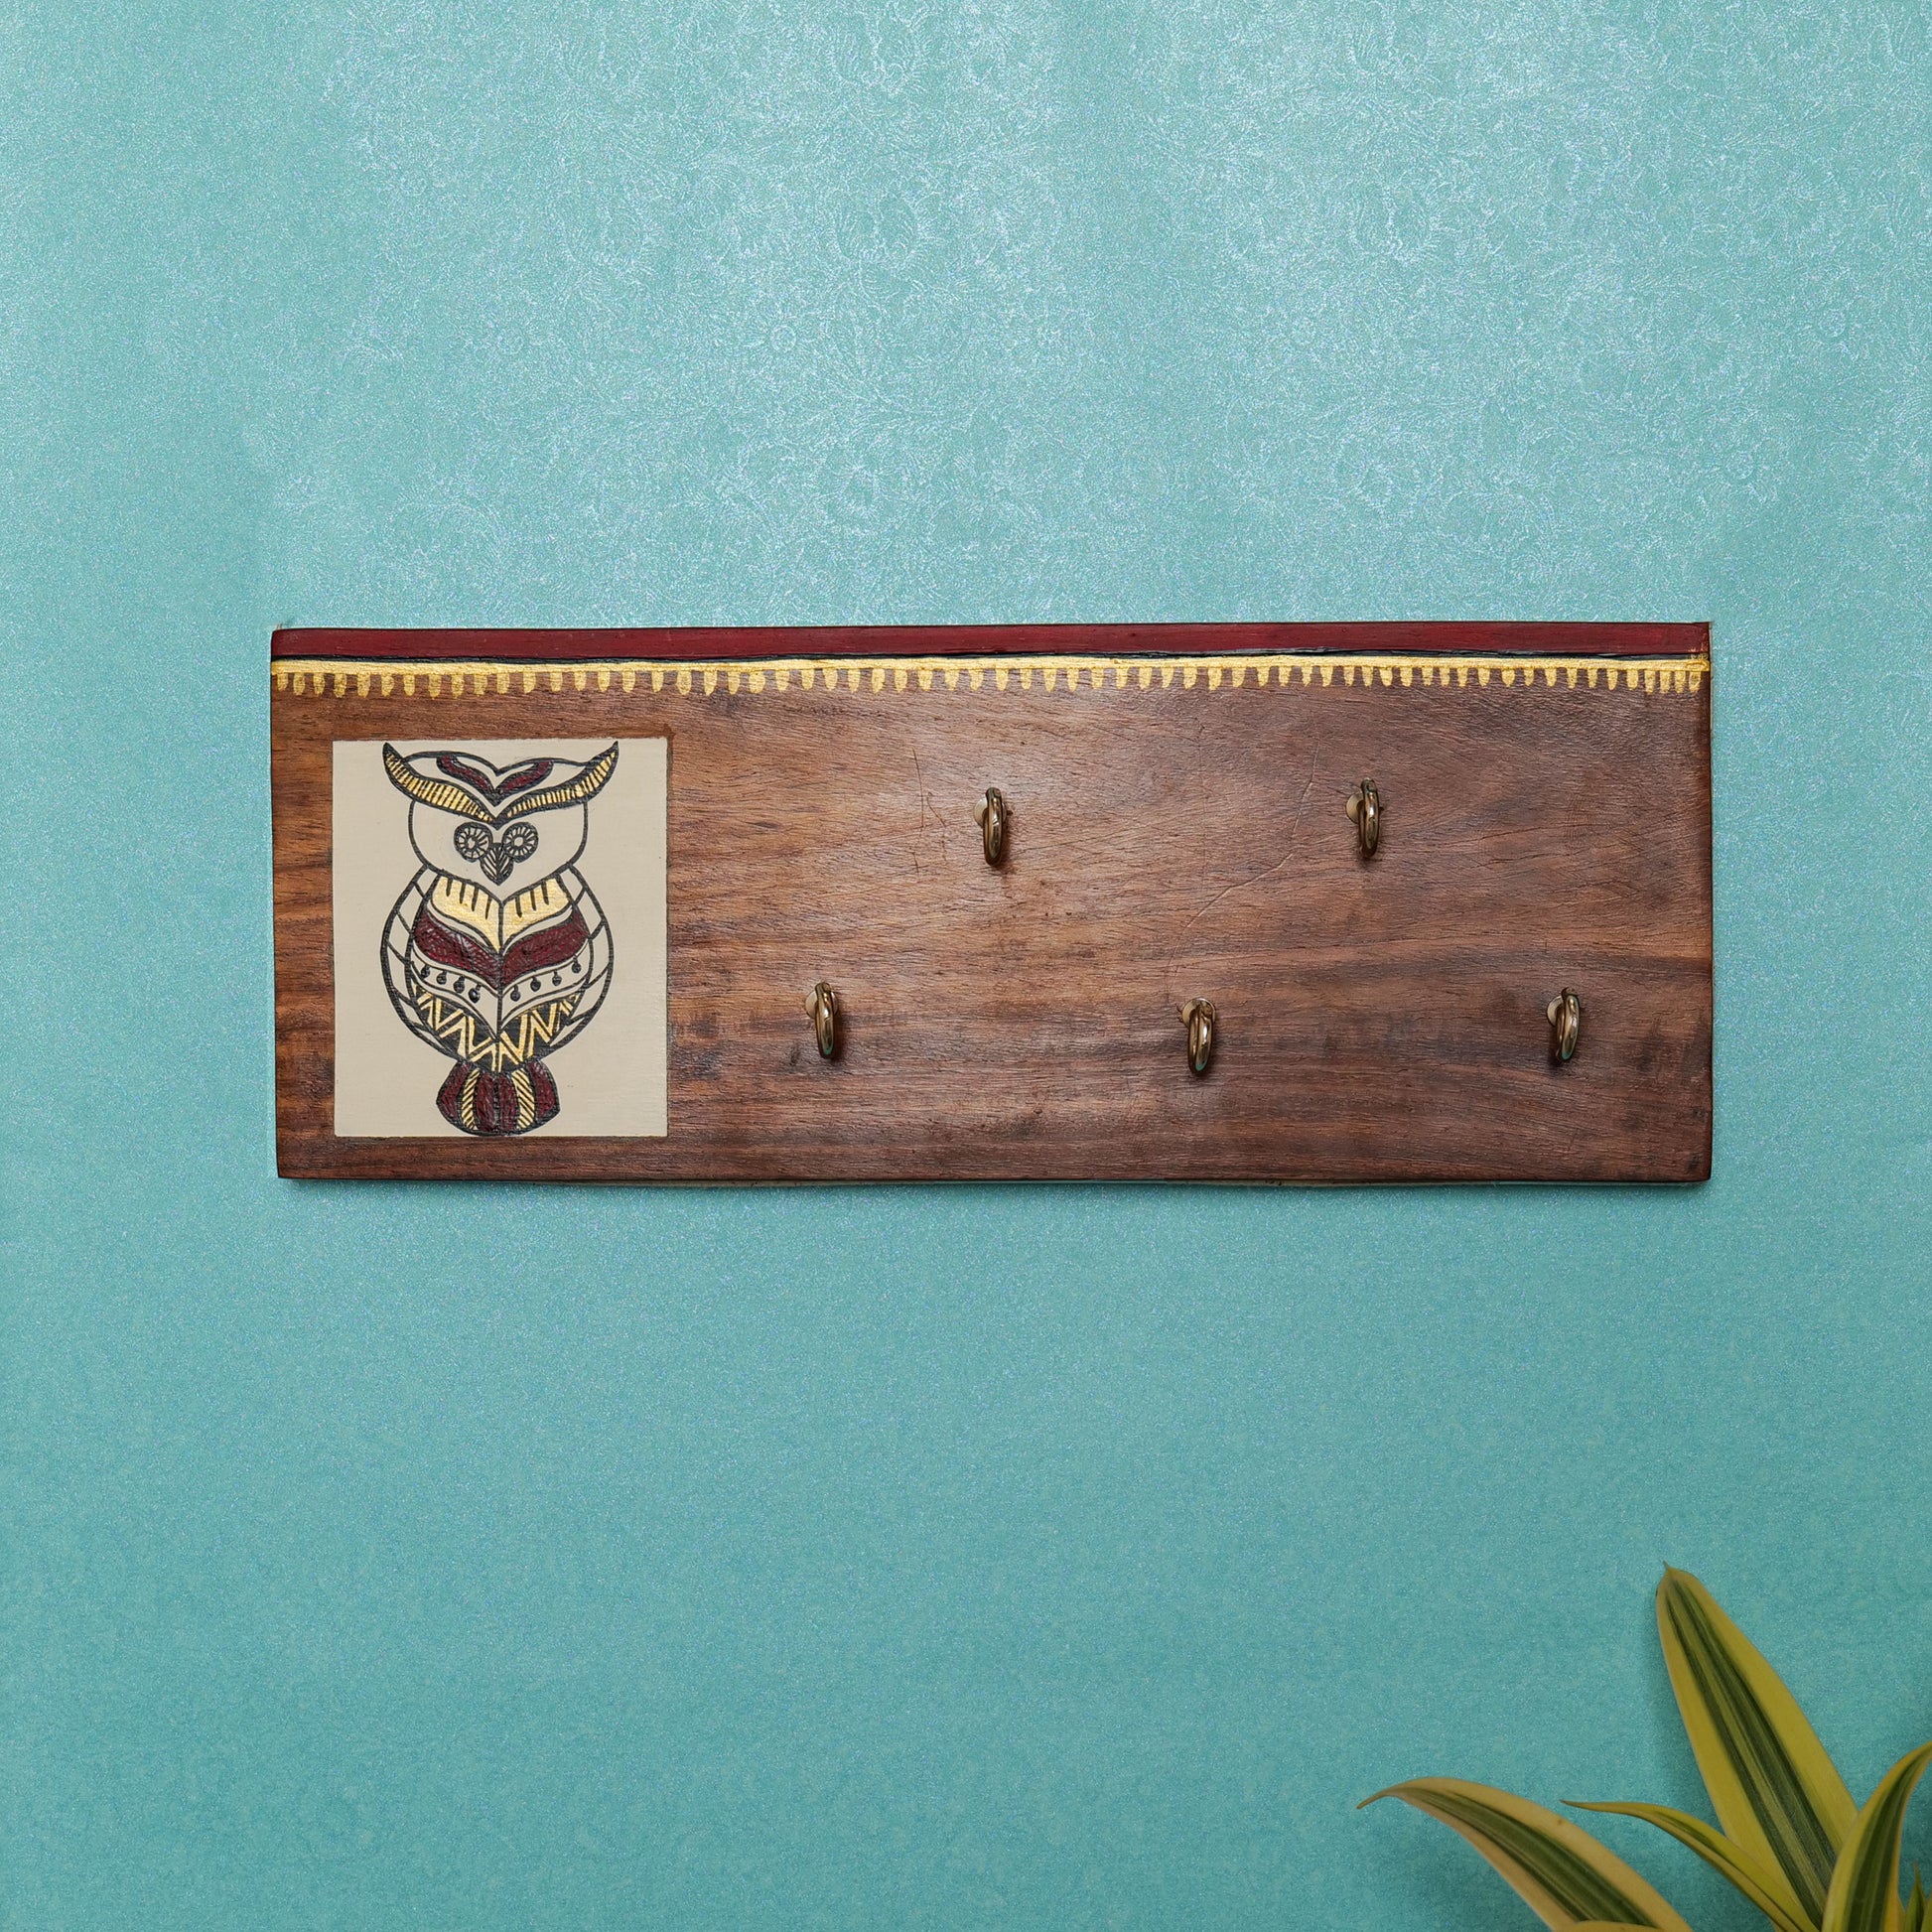 "Owl on Plank" Hand Crafted Wooden Decorative Key Holder | Wall Mounted Key Hanger for Home Décor